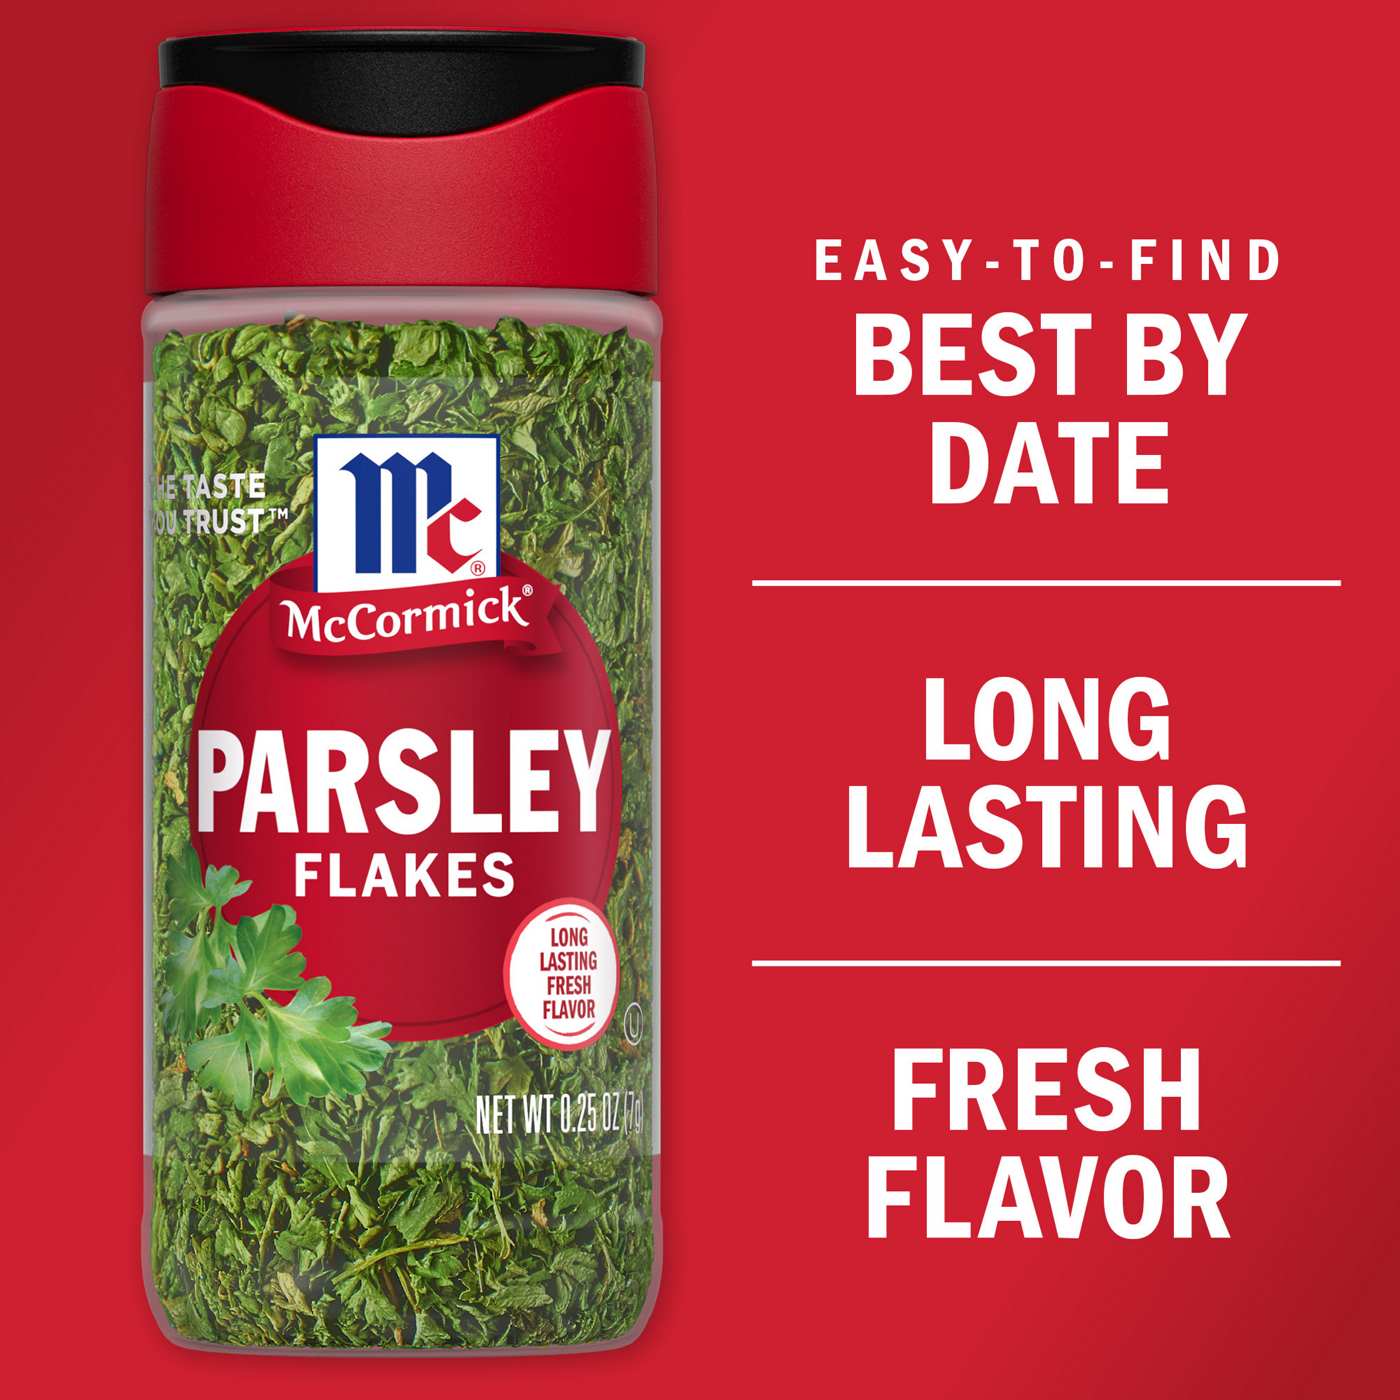 McCormick Parsley Flakes; image 4 of 8